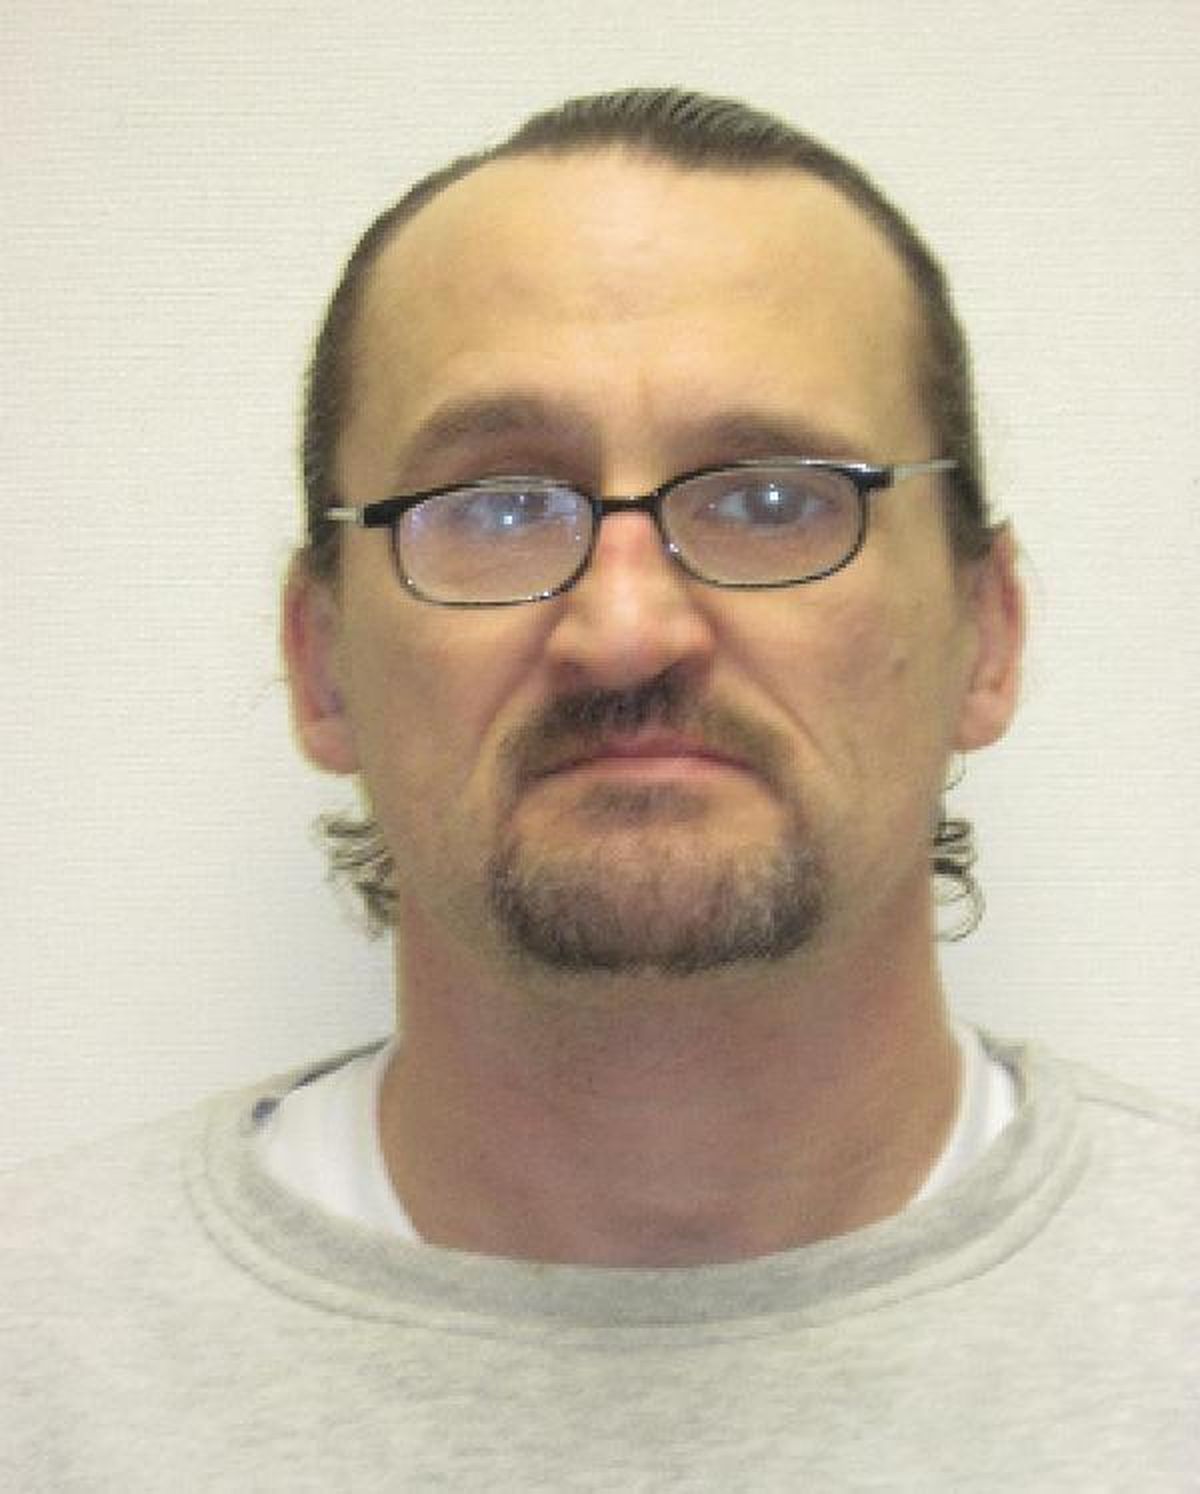 David Ford, 48, escaped from community corrections and a public safety group is asking for help finding him. (Crime Stoppers of the Inland Northwest)